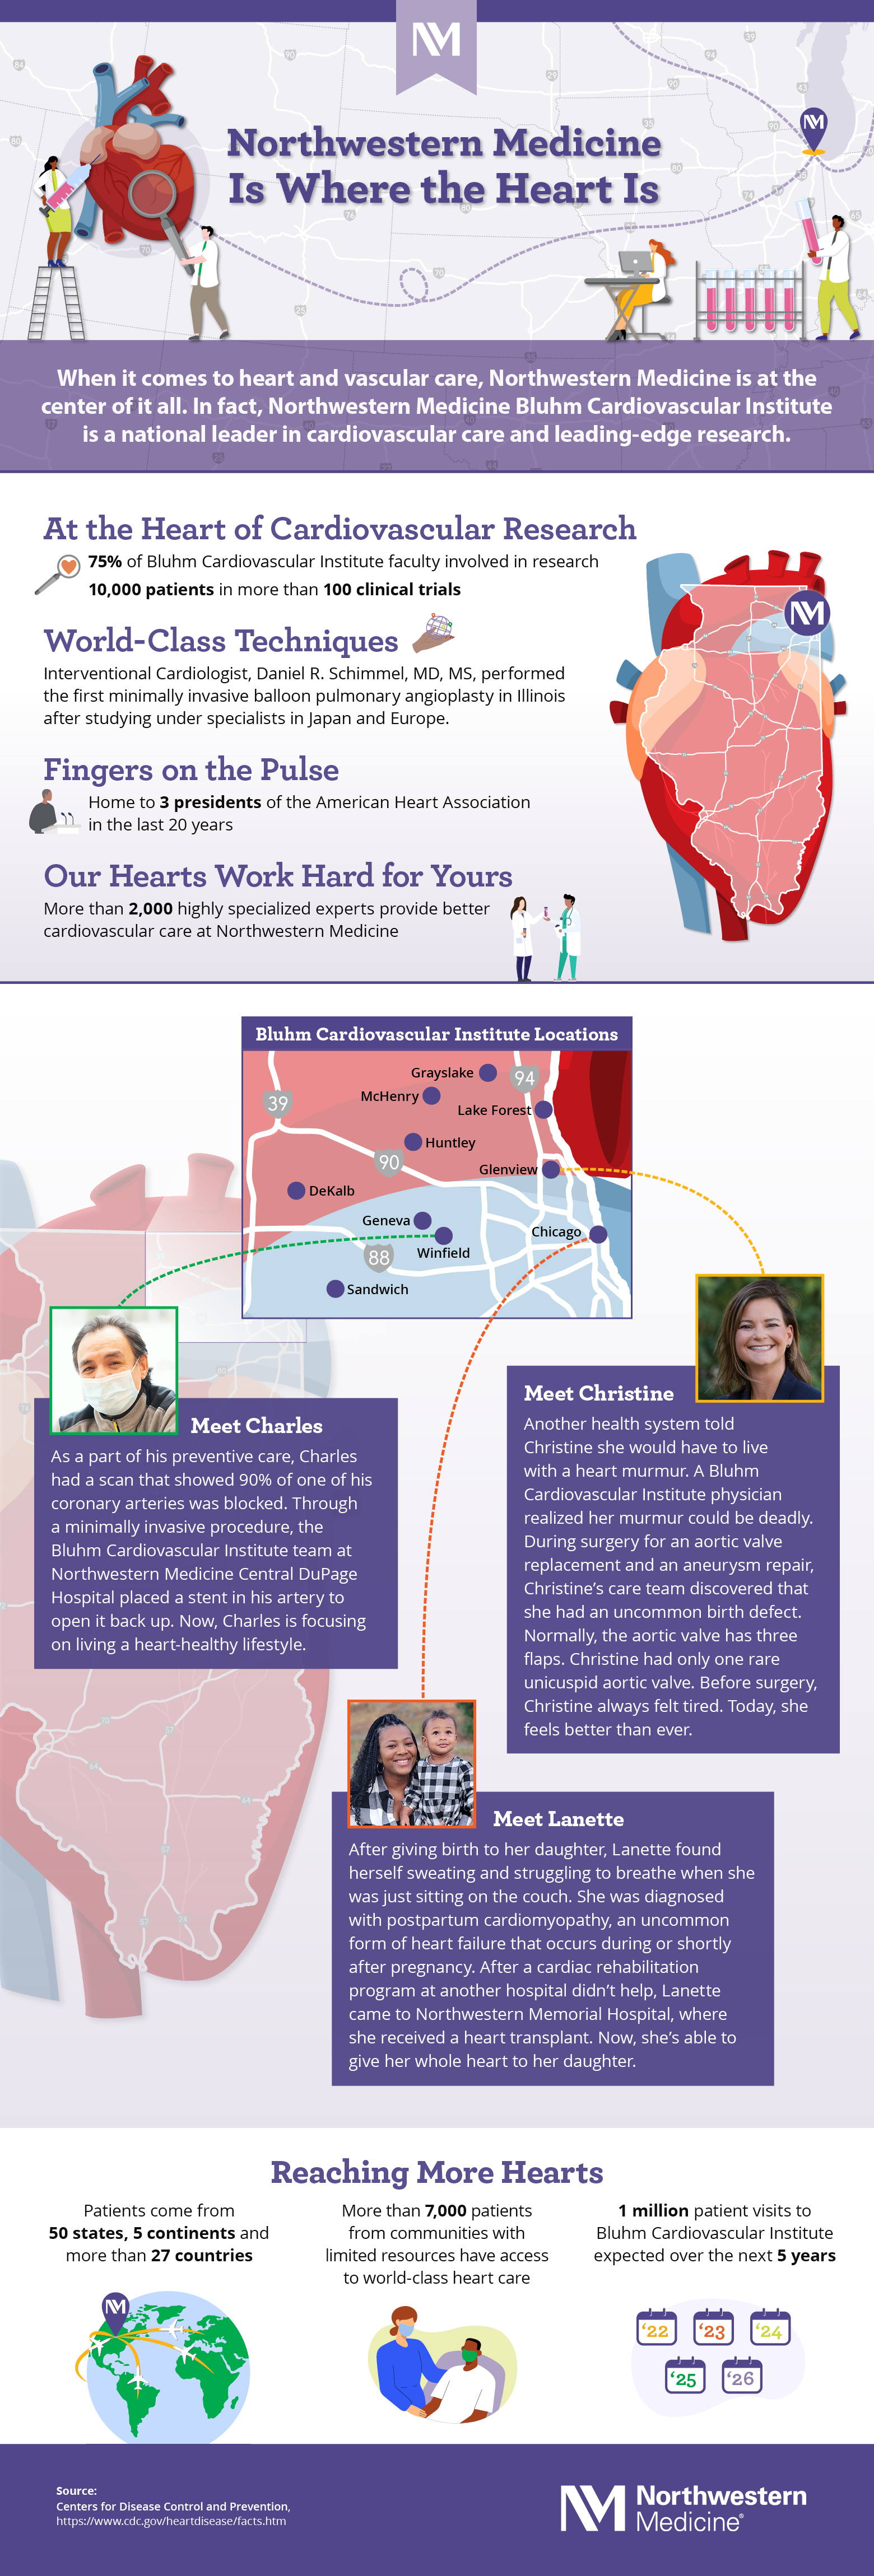 nm-northwestern-medicine-is-where-the-heart-is_infographic